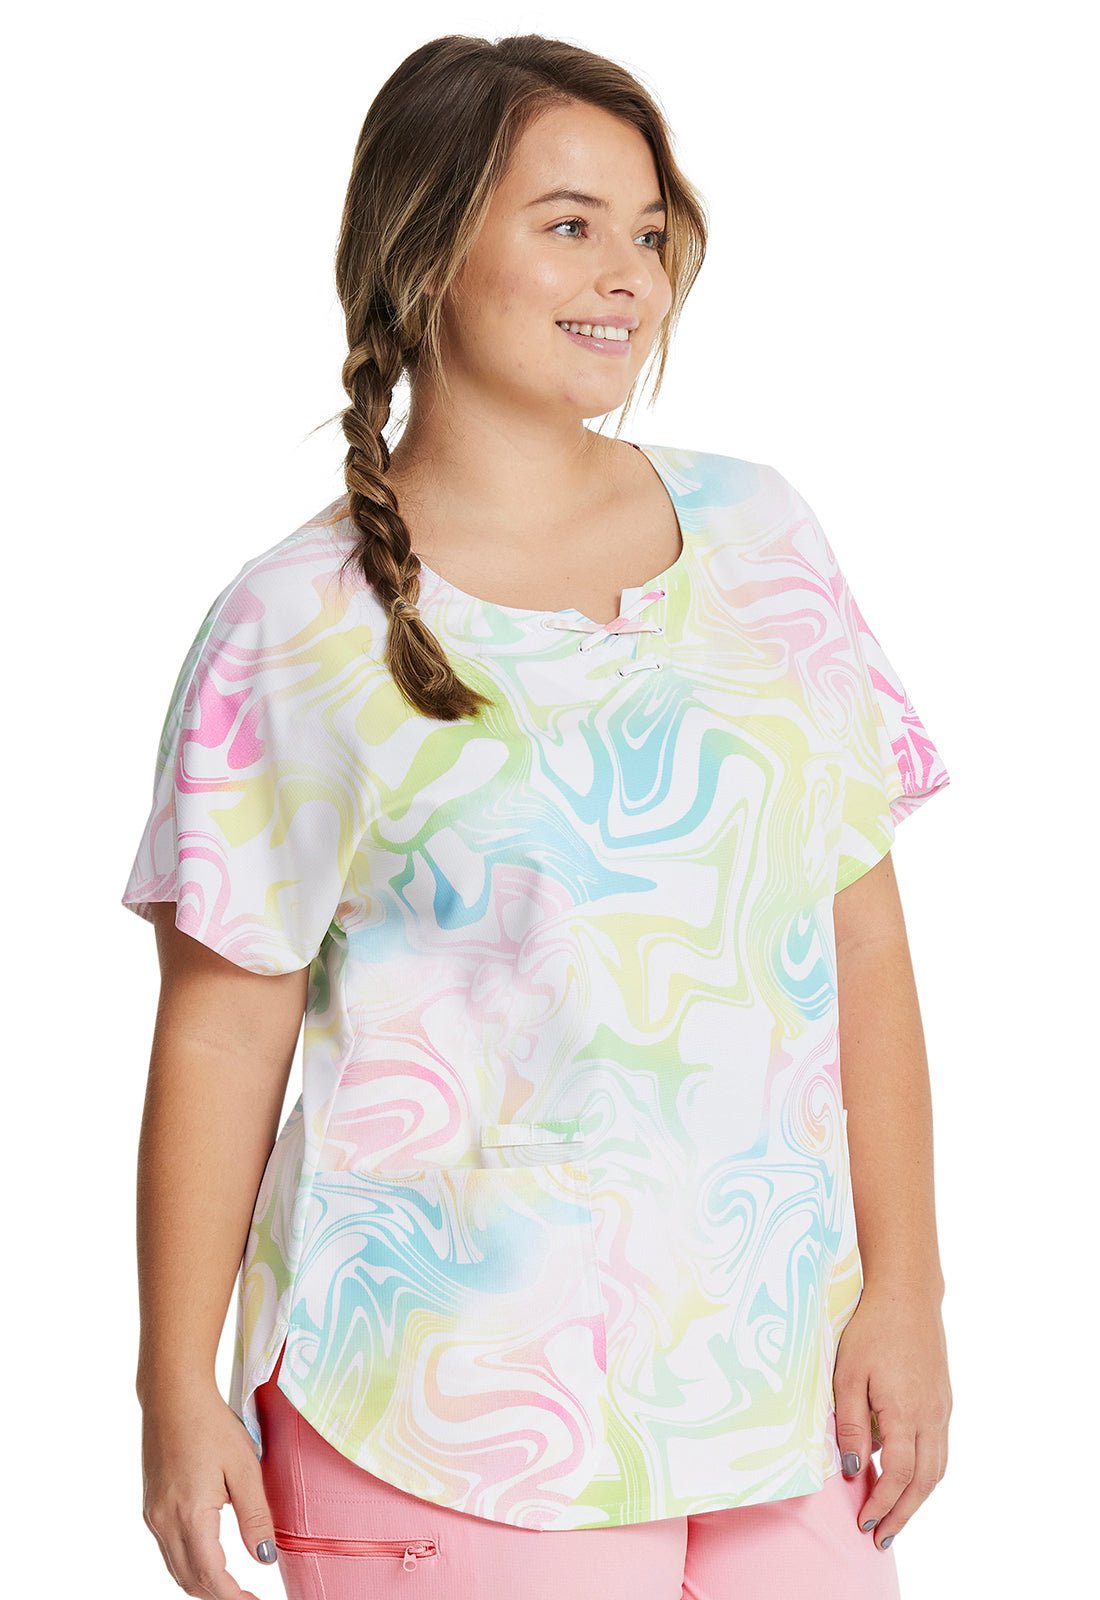 Gimme A Swirl HeartSoul Print Round Neck Scrub Top HS685 GESW - Scrubs Select